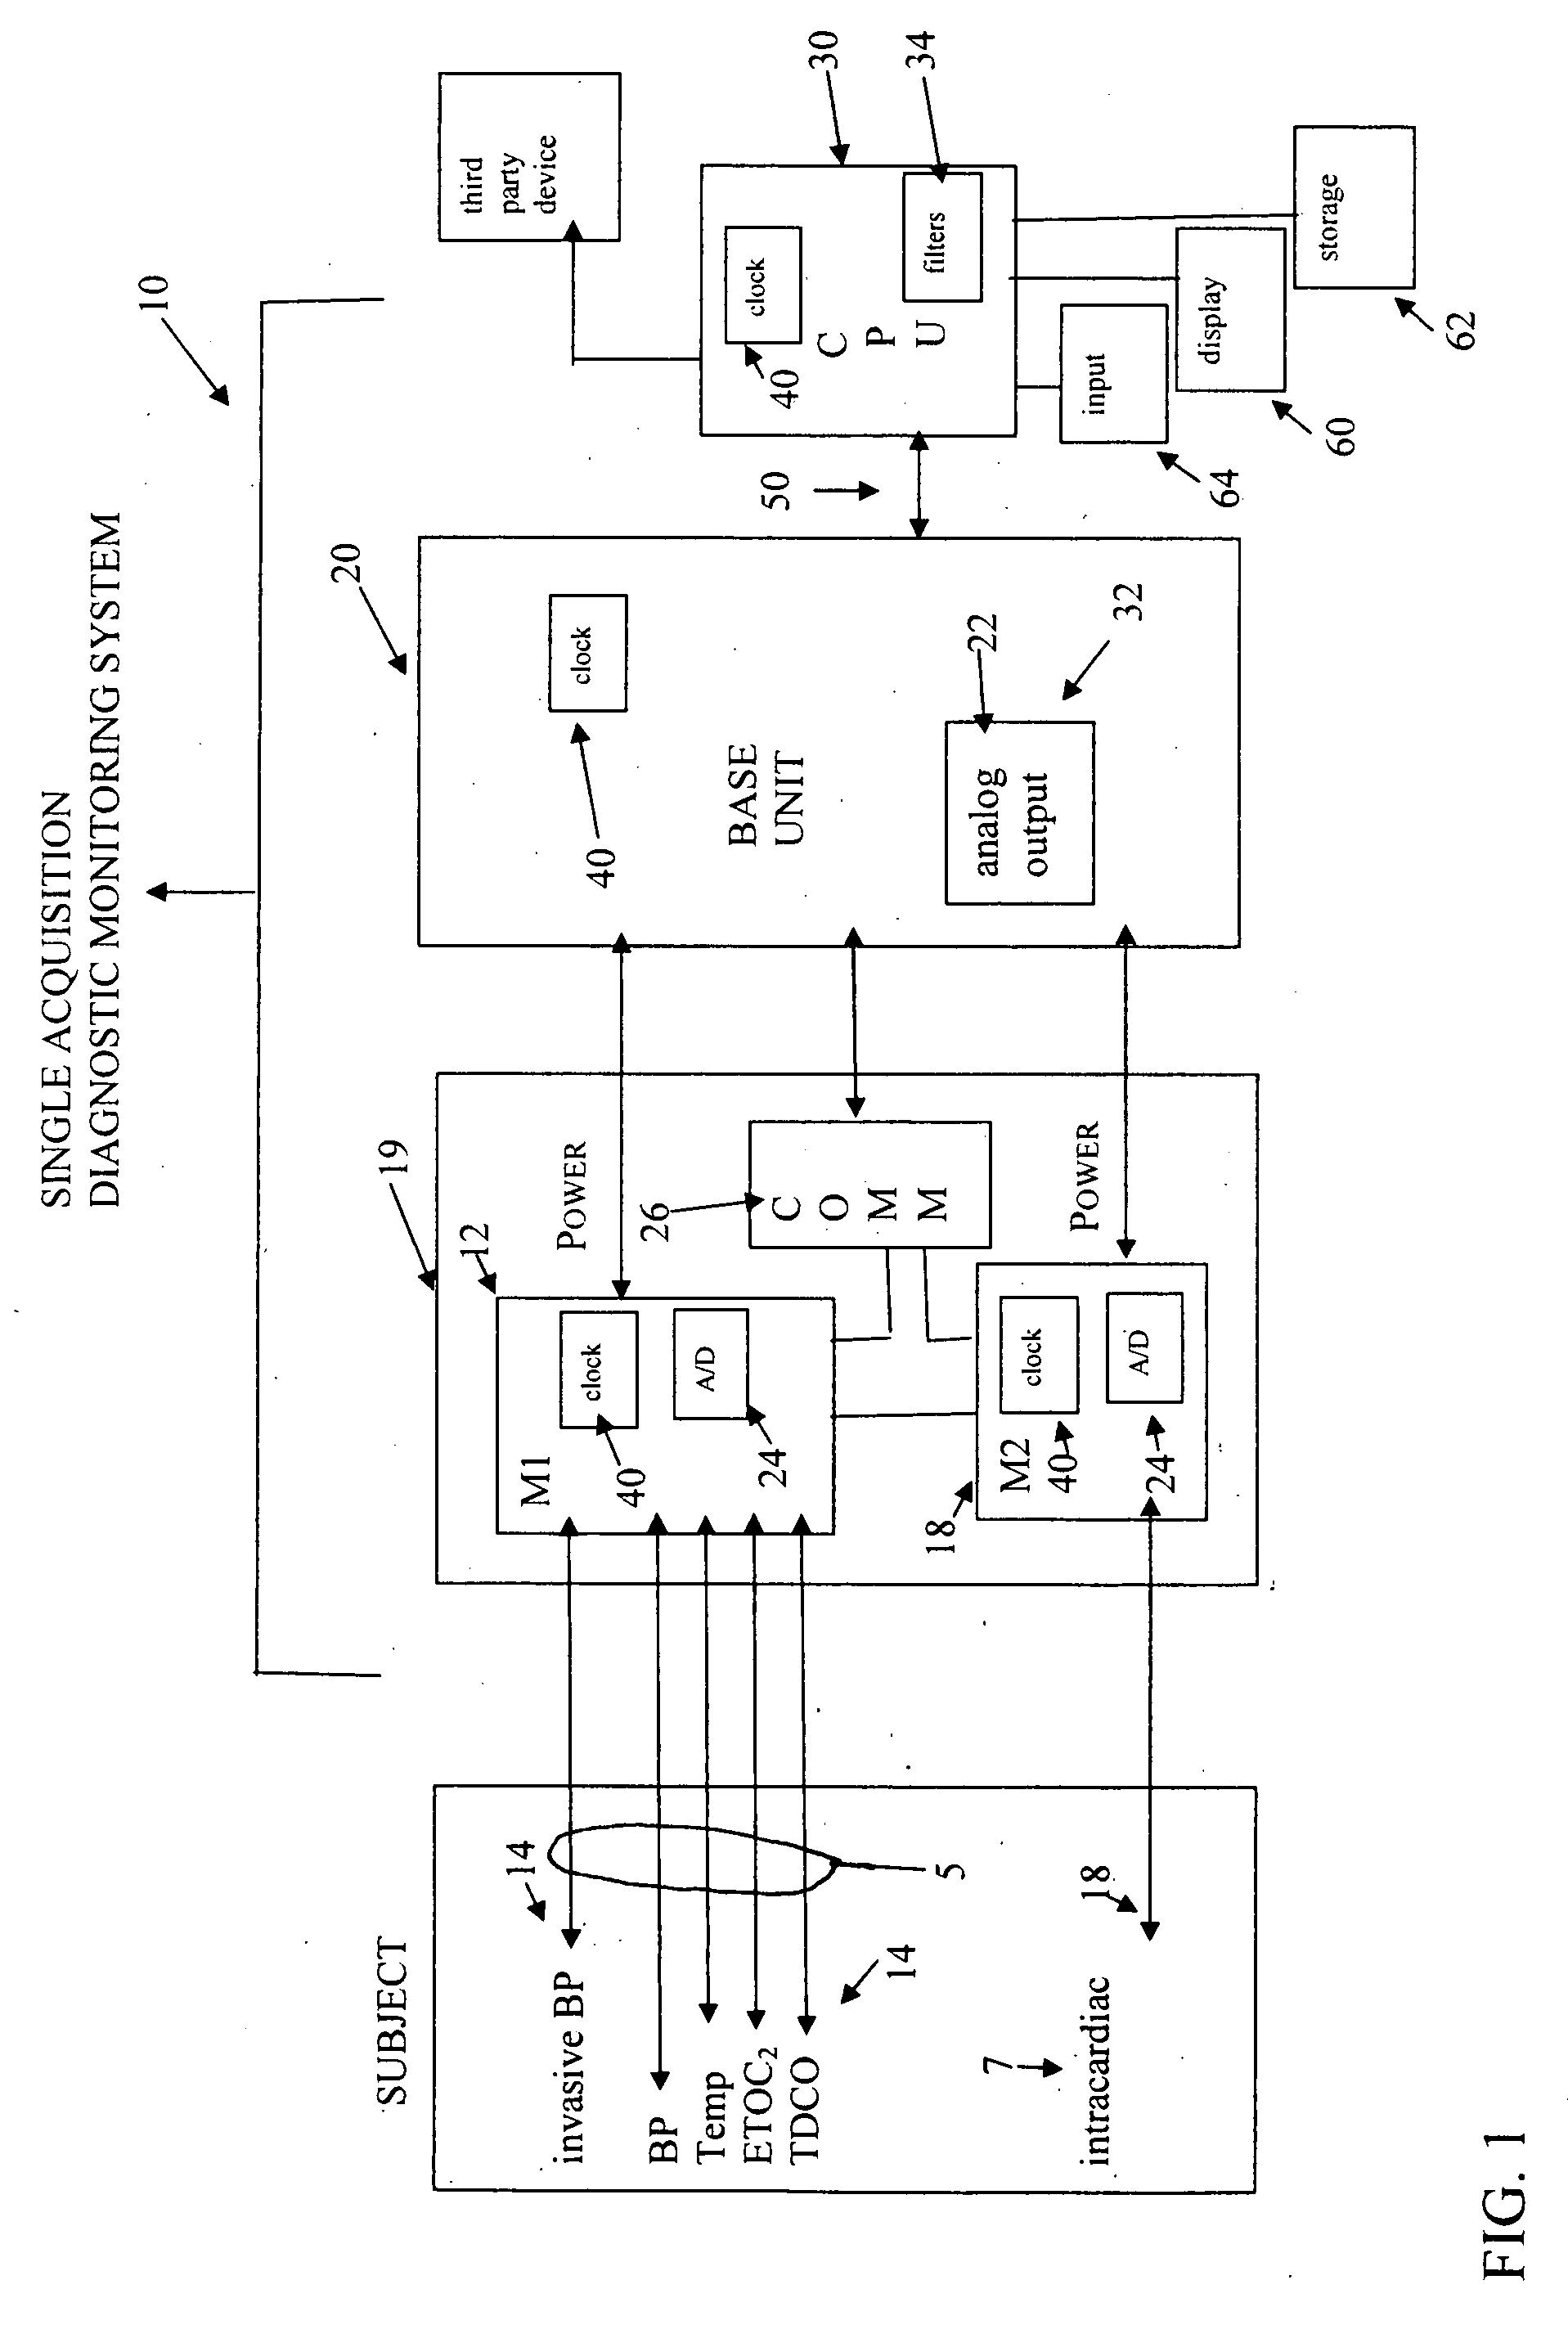 Single acquisition system for electrophysiology and hemodynamic physiological diagnostic monitoring during a clinical invasive procedure